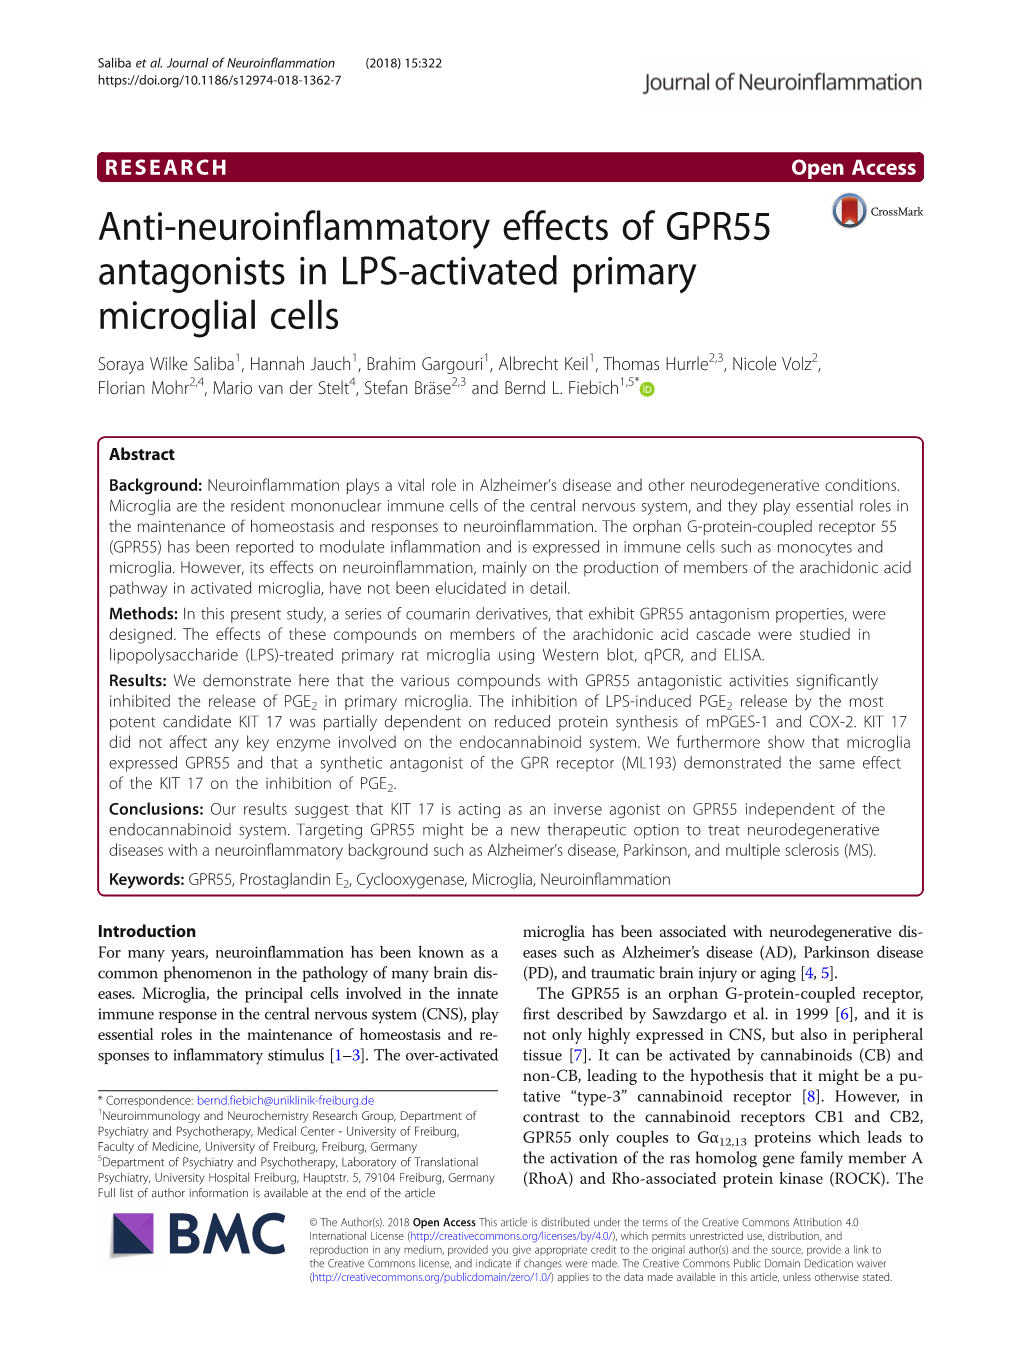 Anti-Neuroinflammatory Effects of GPR55 Antagonists in LPS